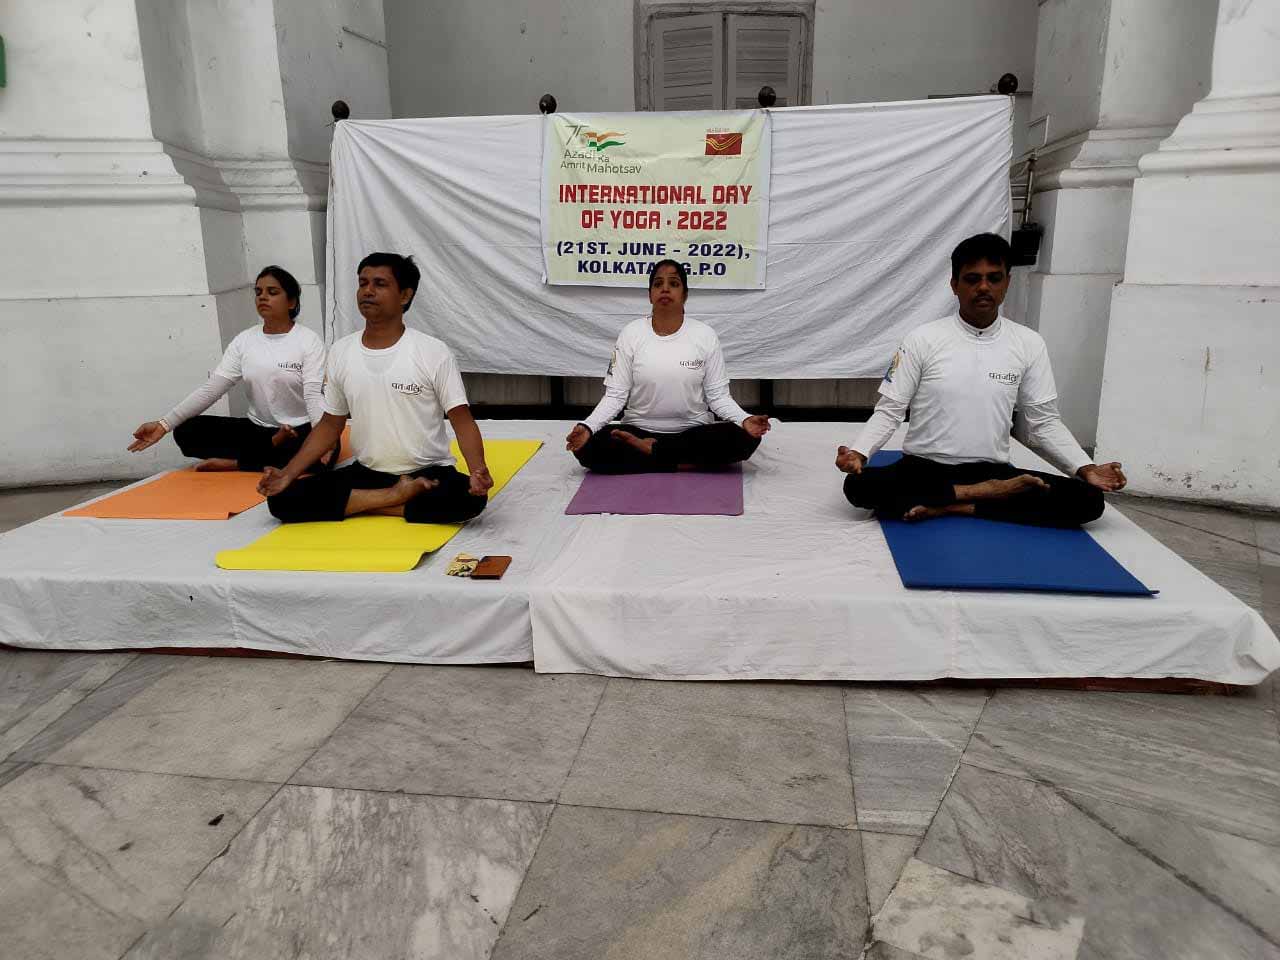 The Kolkata General Post Office celebrated the fitness of mind and body through yoga sessions to commemorate World Yoga Day.